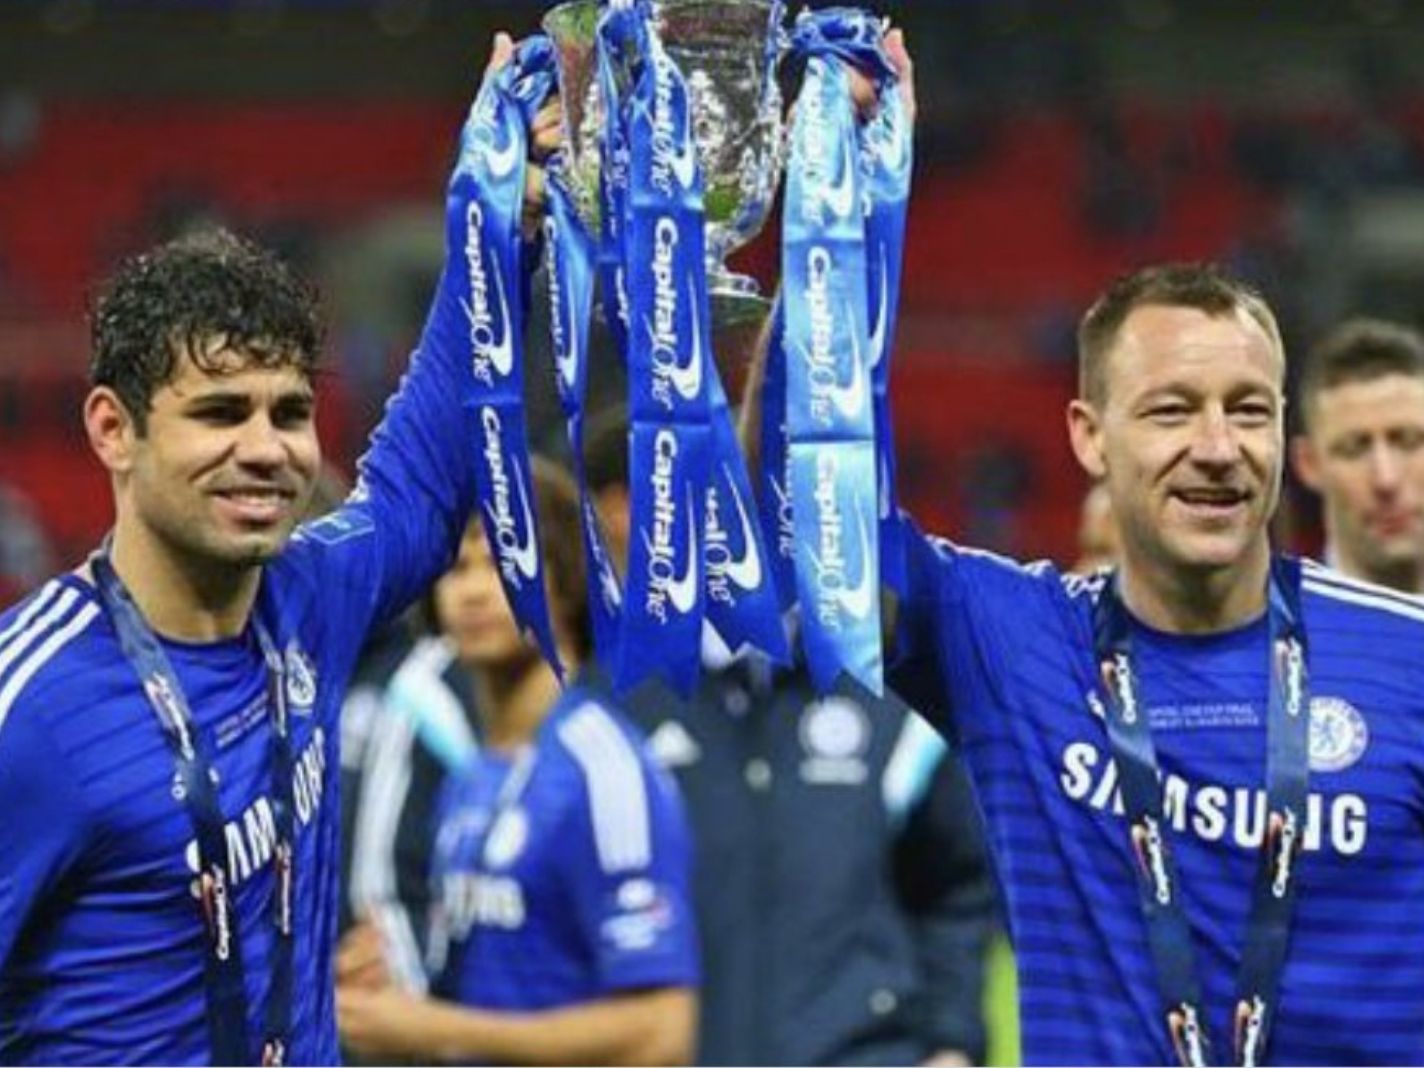 John Terry bats for free agent Diego Costa after Chelsea teammate goes unsold